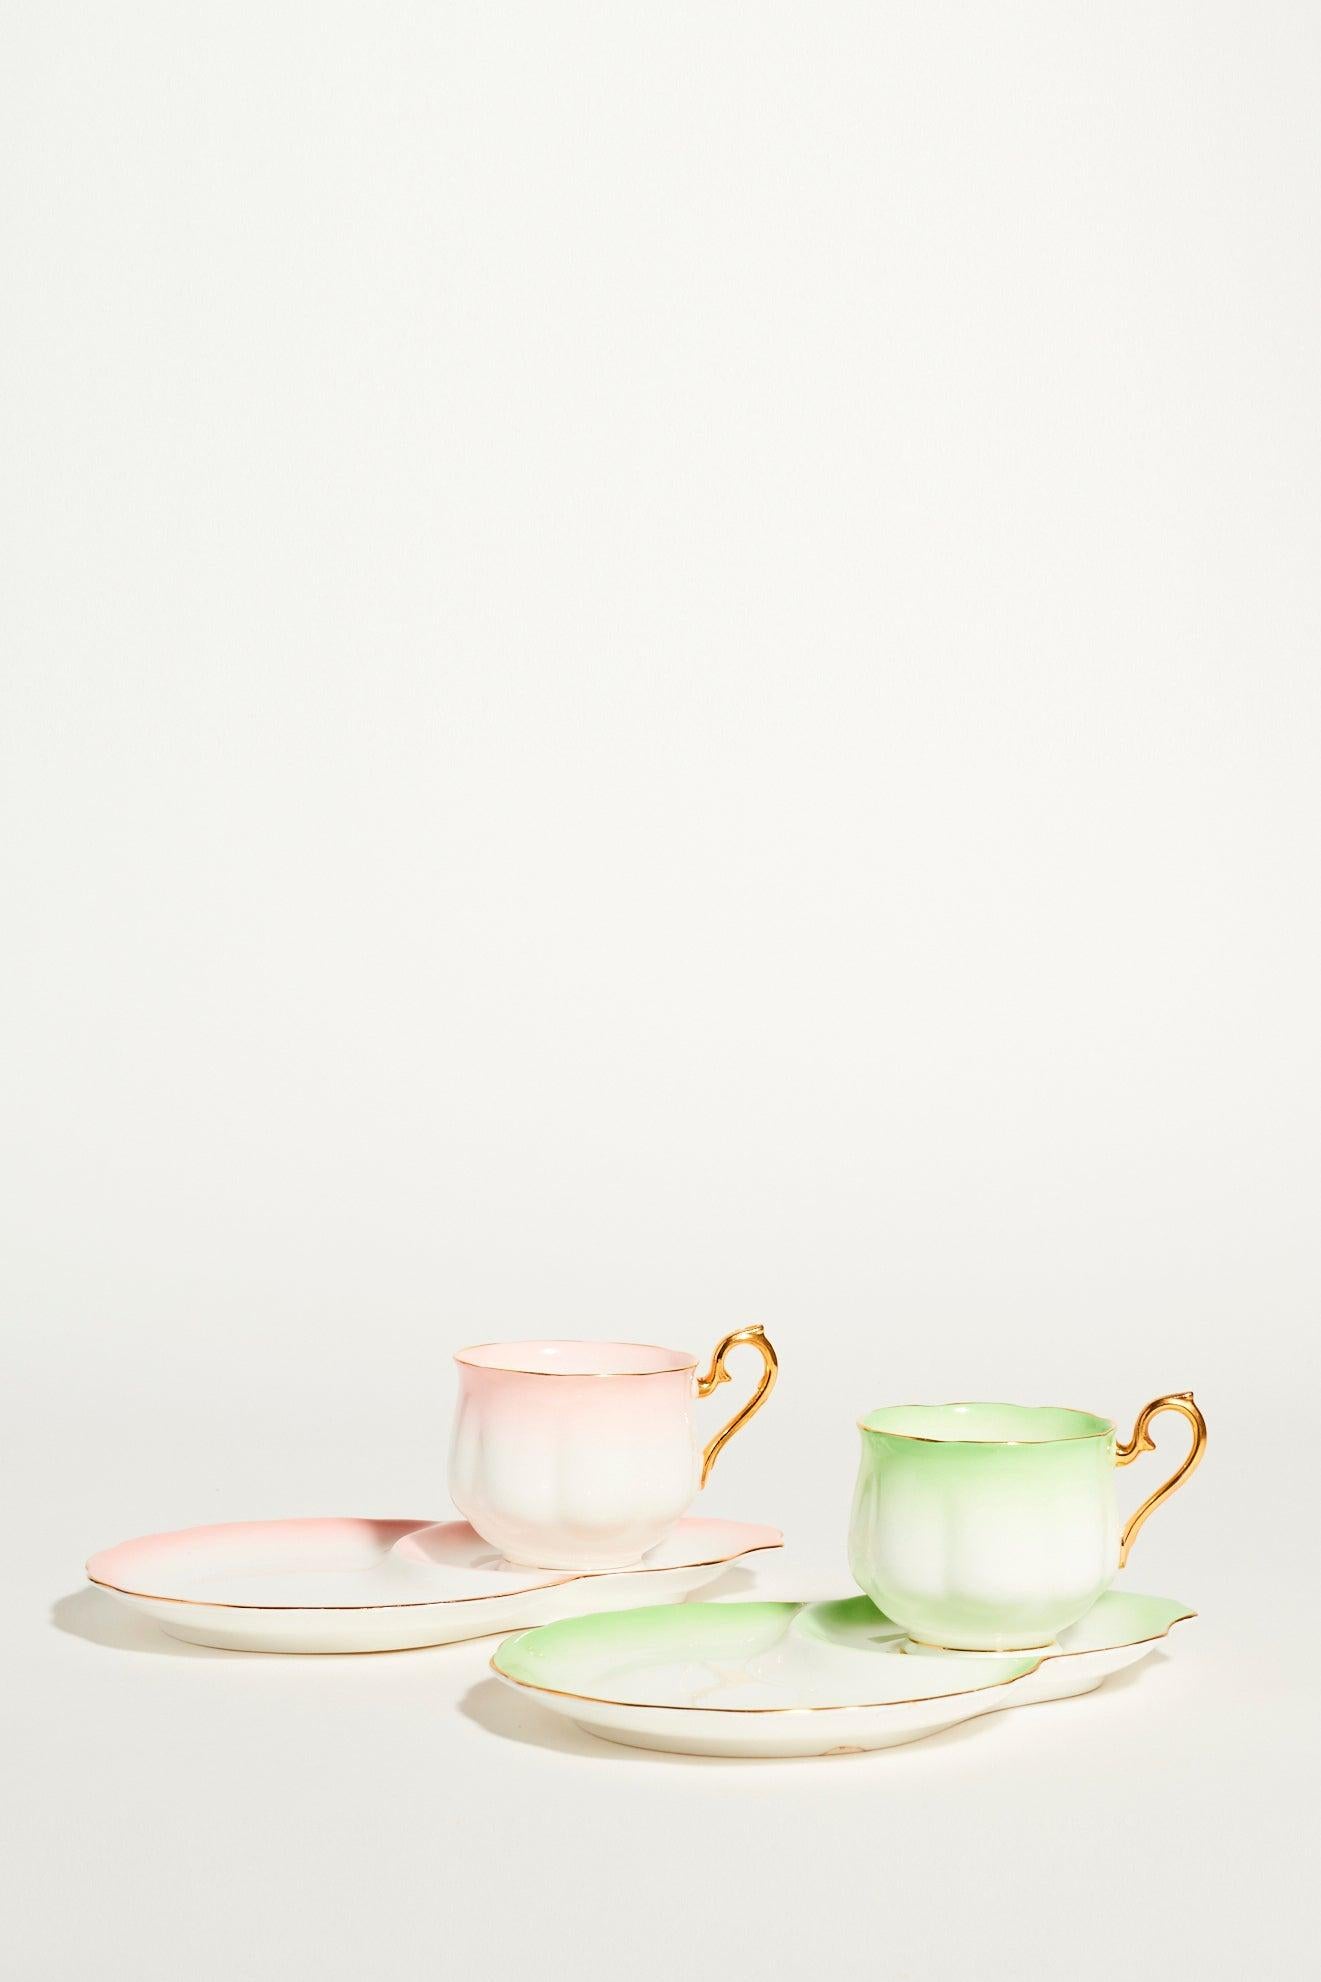 Indulge your inner Bridgerton, English bone china tea set of two in whisper pink, delicate green and white accented with gilded handles and fine edging 

 